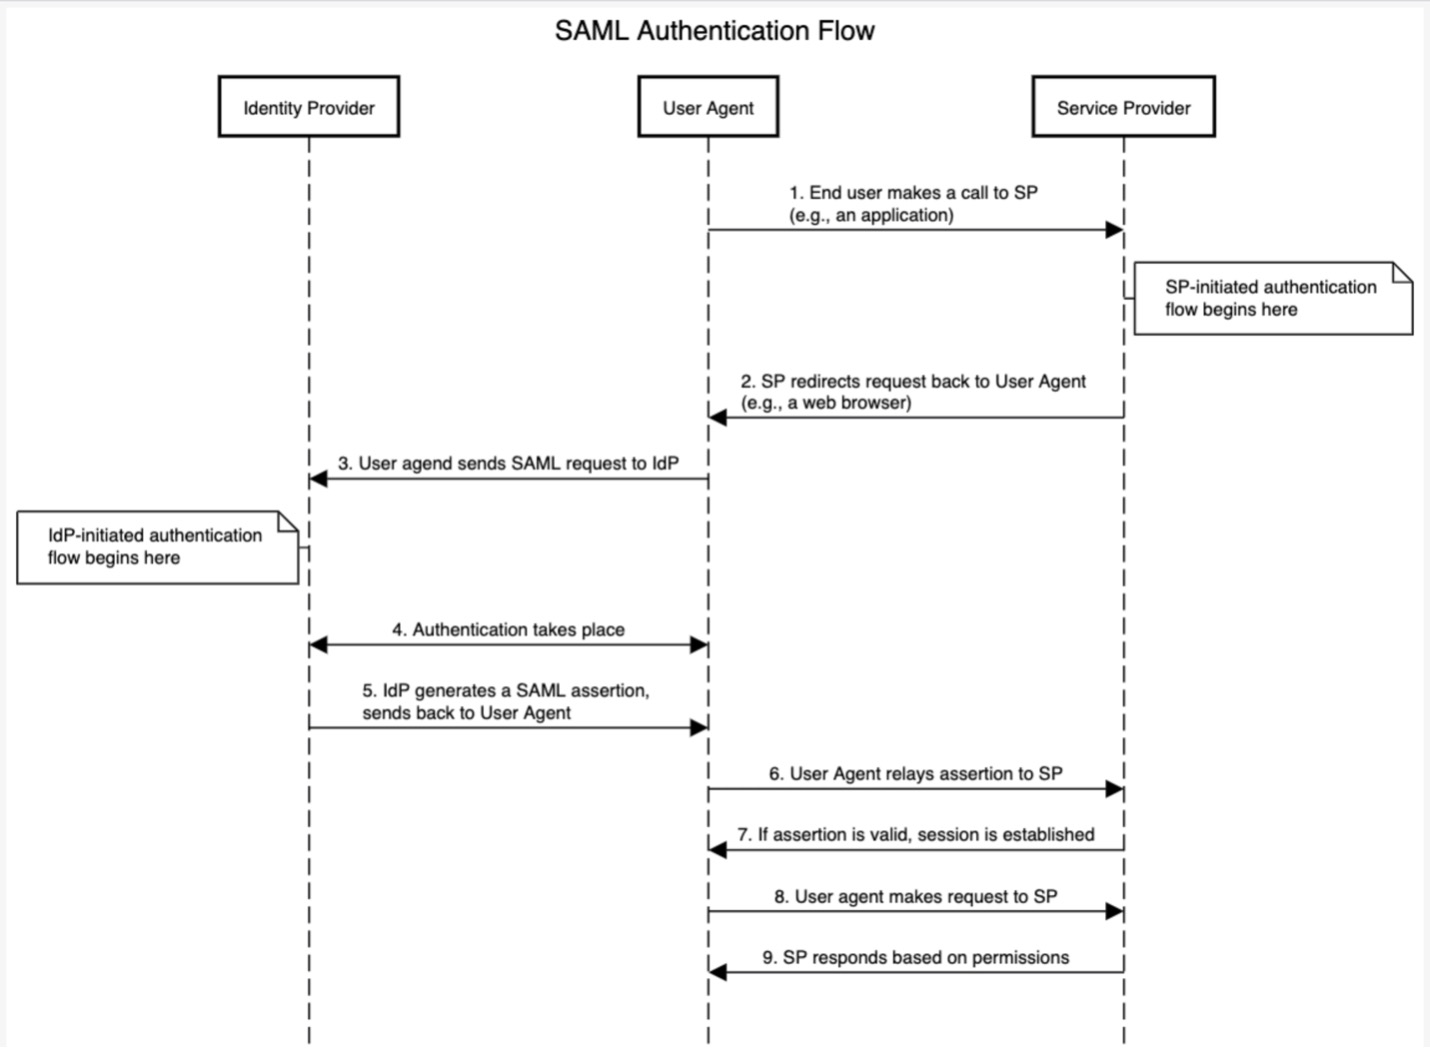 Sequence Diagram for a SAML authentication flow, including the IdP, user Agent, and Service Provider. 